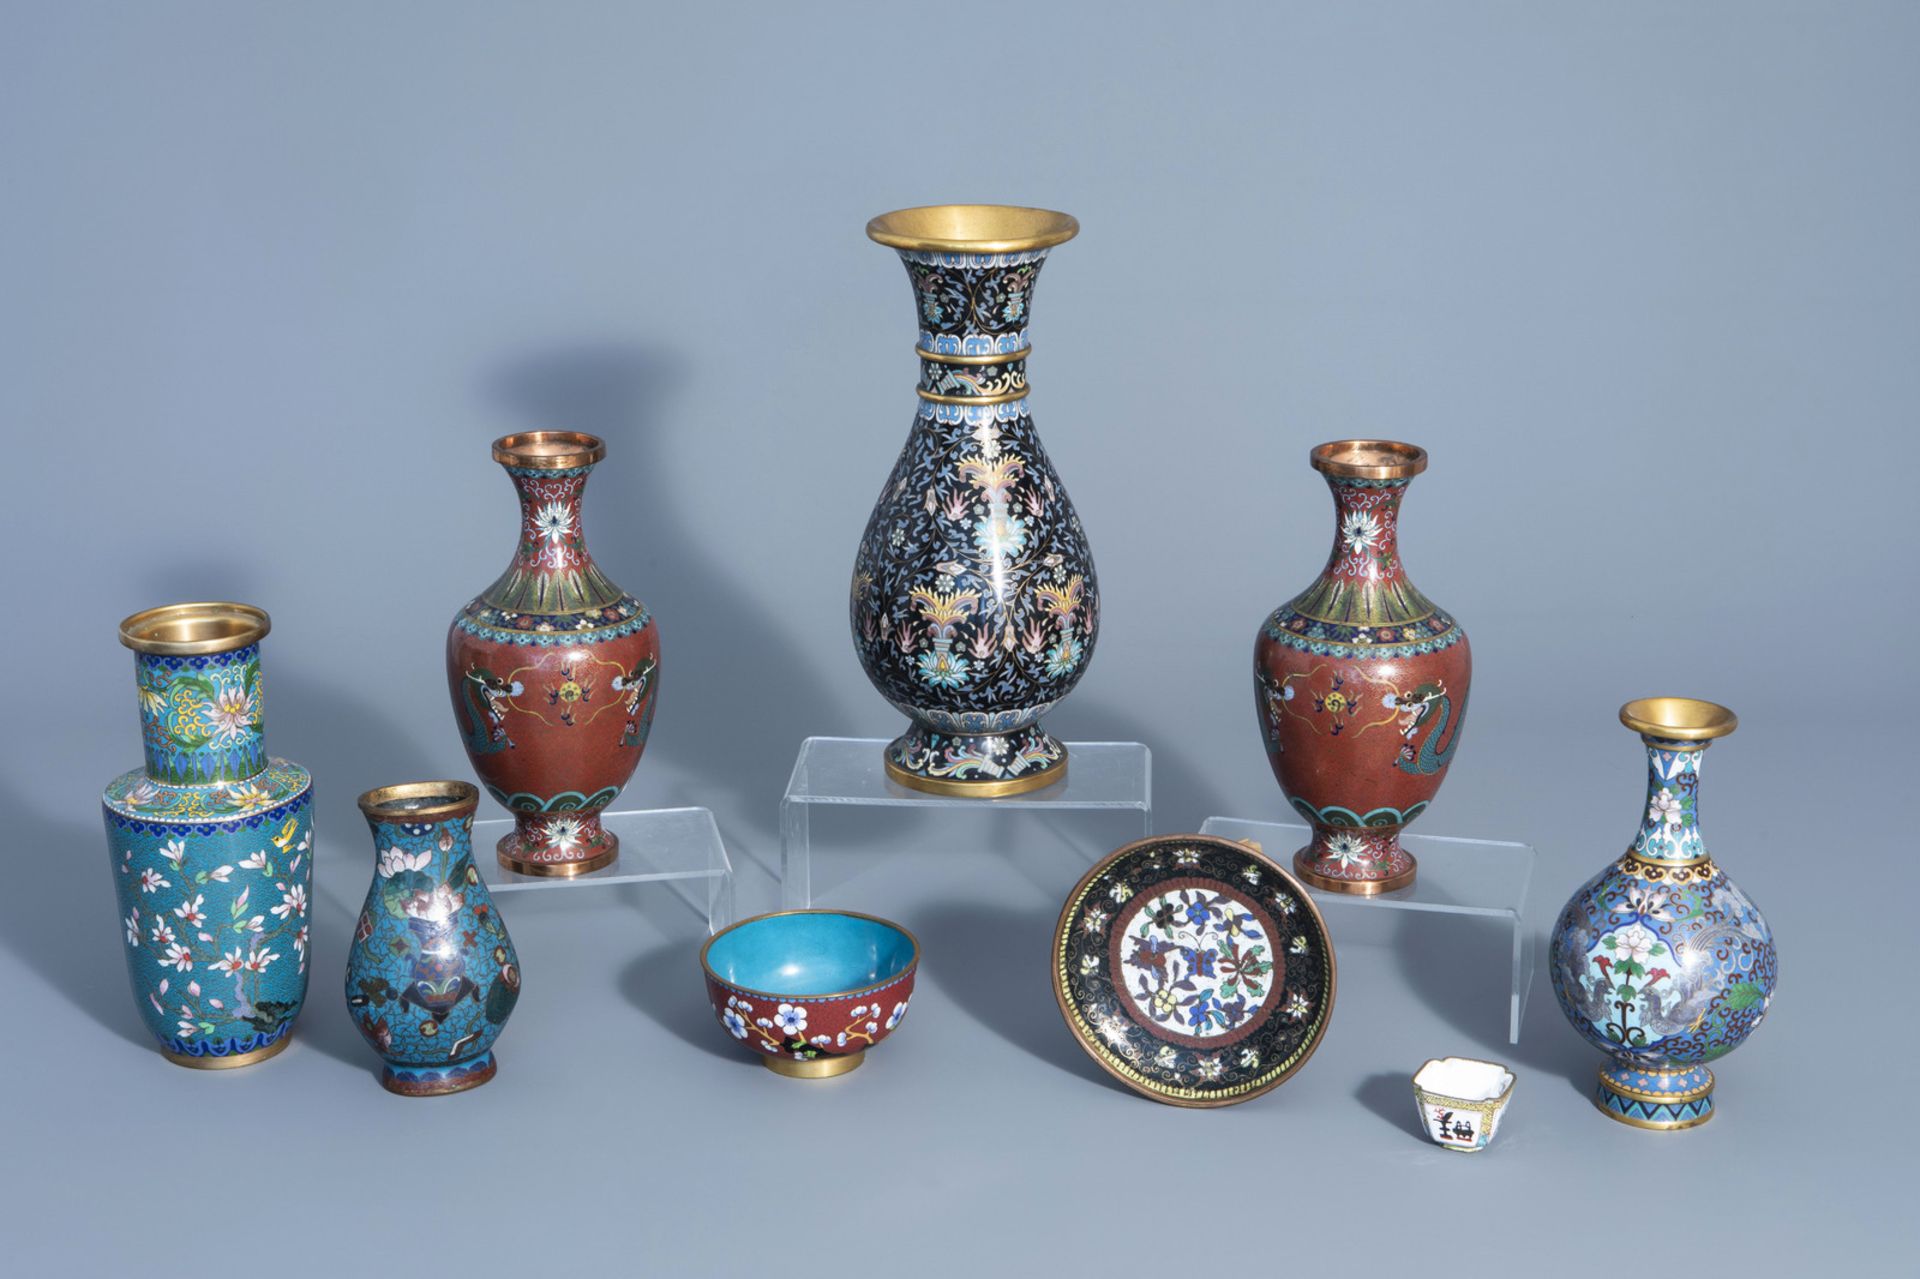 A varied collection of Chinese cloisonnŽ and enamel wares, 19th/20th C.